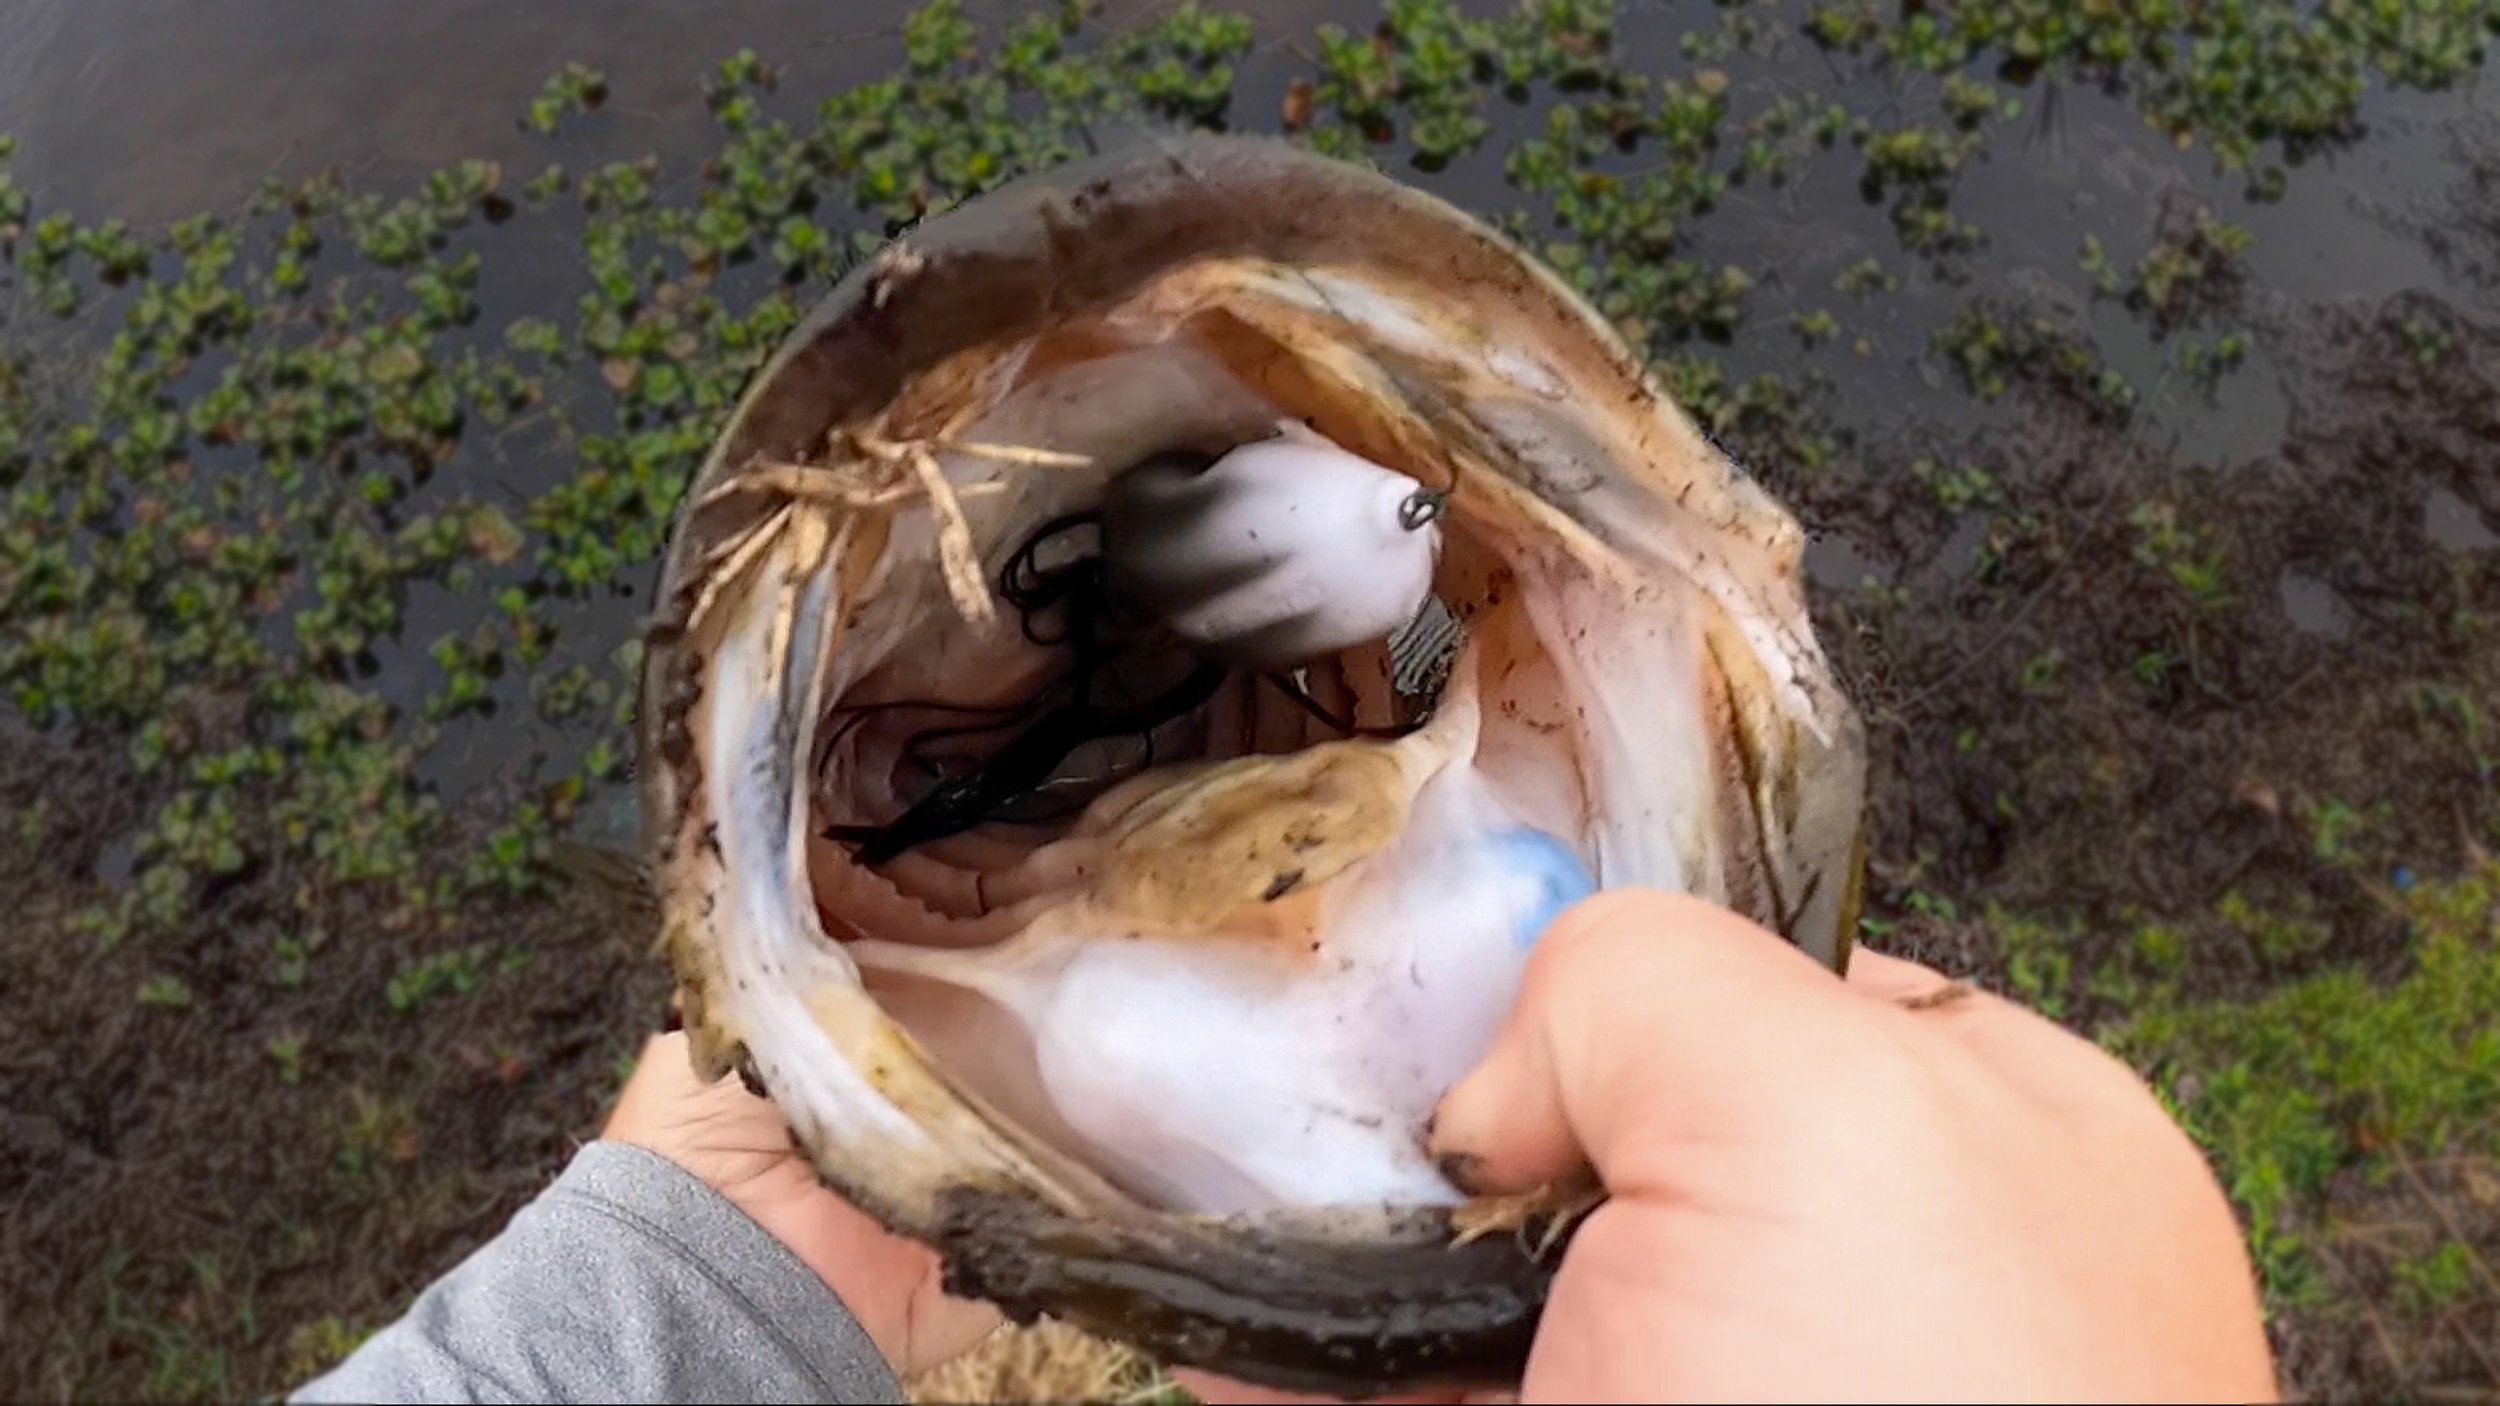 TOP 5 Baits For POND FISHING And BANK FISHING (And How To Fish Them) 